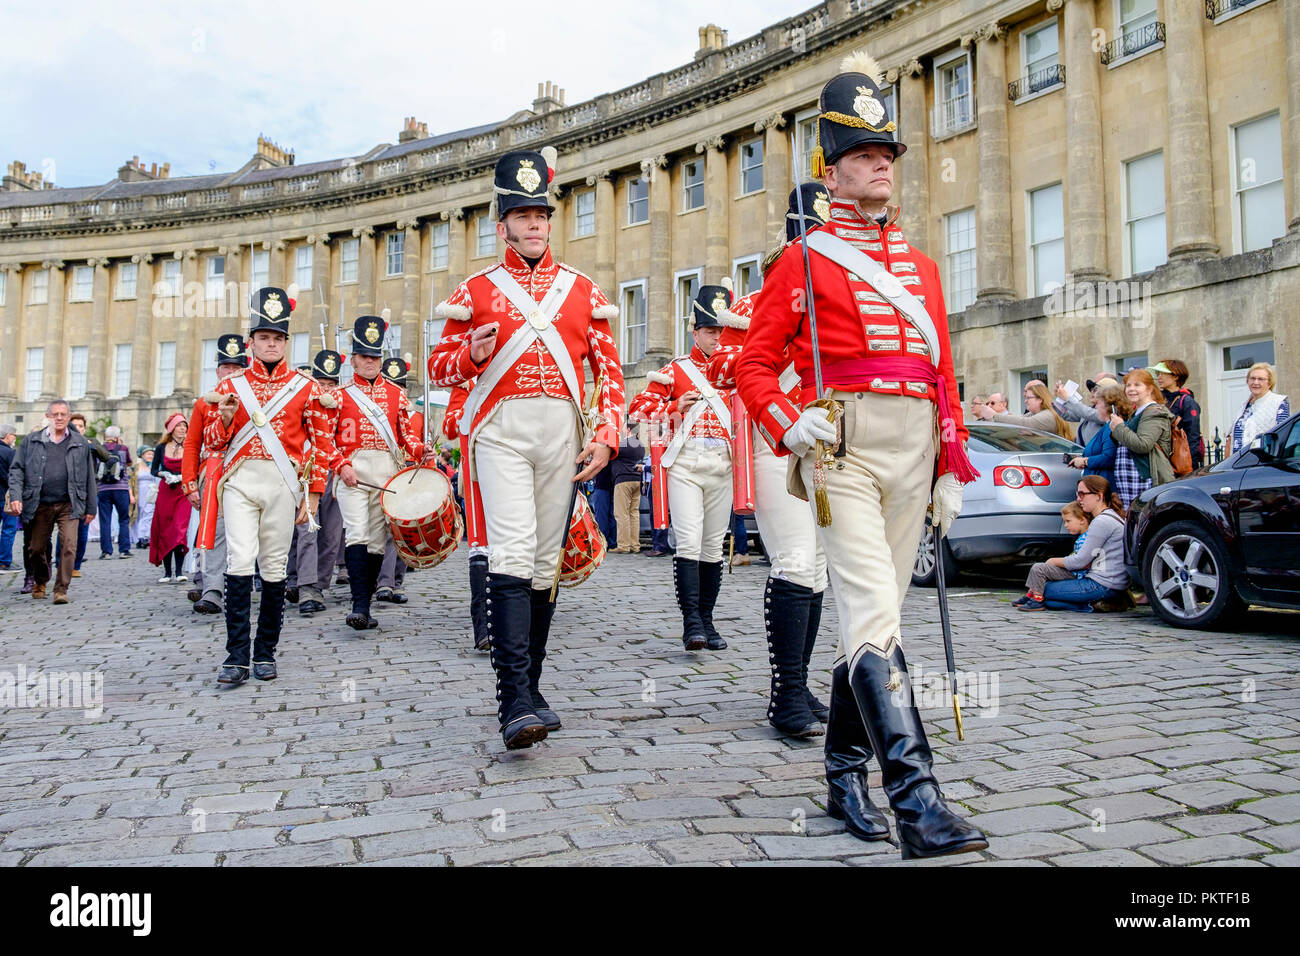 Bath, UK. 15th Sep, 2018. Members of the 33rd Regiment Of Foot are pictured marching in front of the Royal Crescent as they take part in the world famous Grand Regency Costumed Promenade. The Promenade, part of the Jane Austen Festival is a procession through the streets of Bath and the participants who come from all over the world dress in 18th Century costume. Credit:  Lynchpics/Alamy Live News Stock Photo